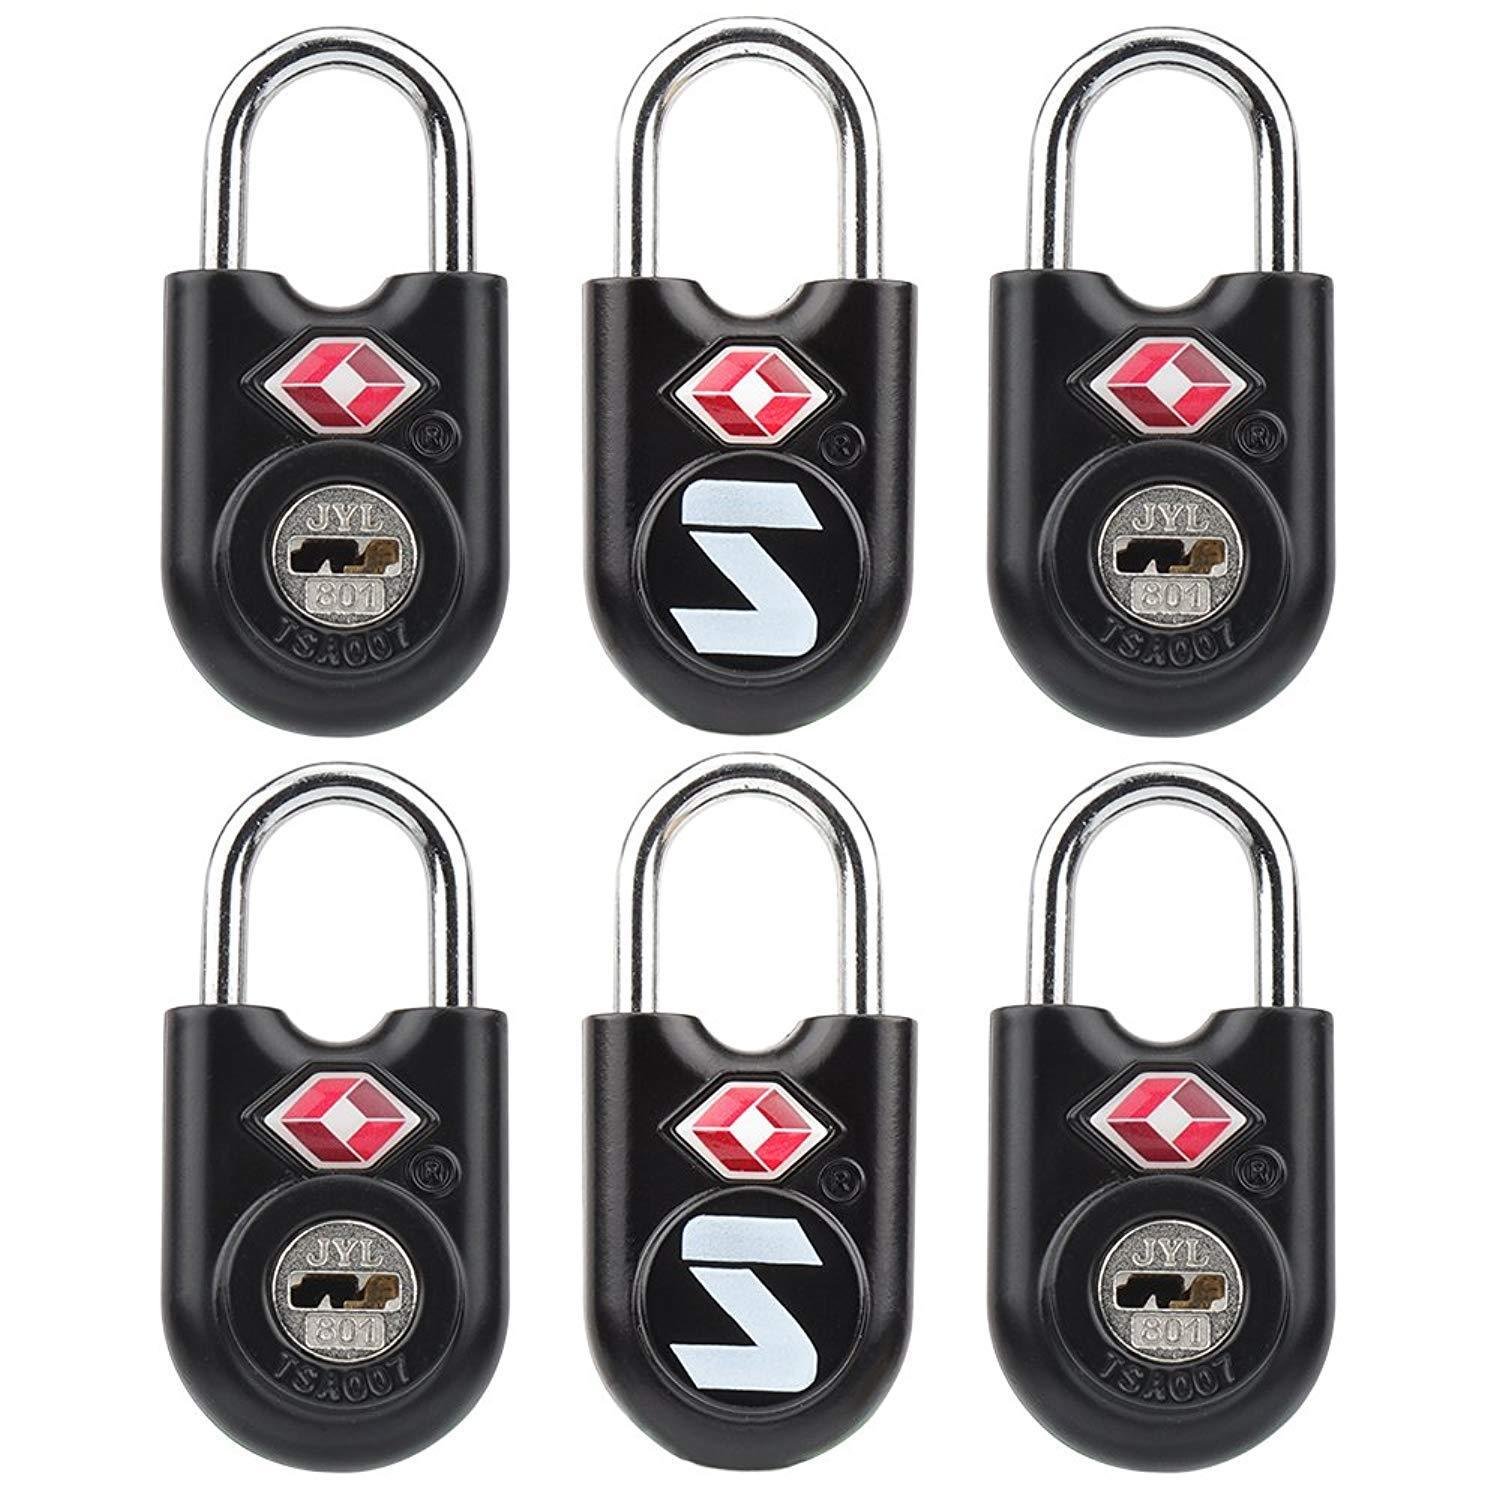 TSA Compatible Travel Luggage Locks, Alloy body with Steel Shackle ...